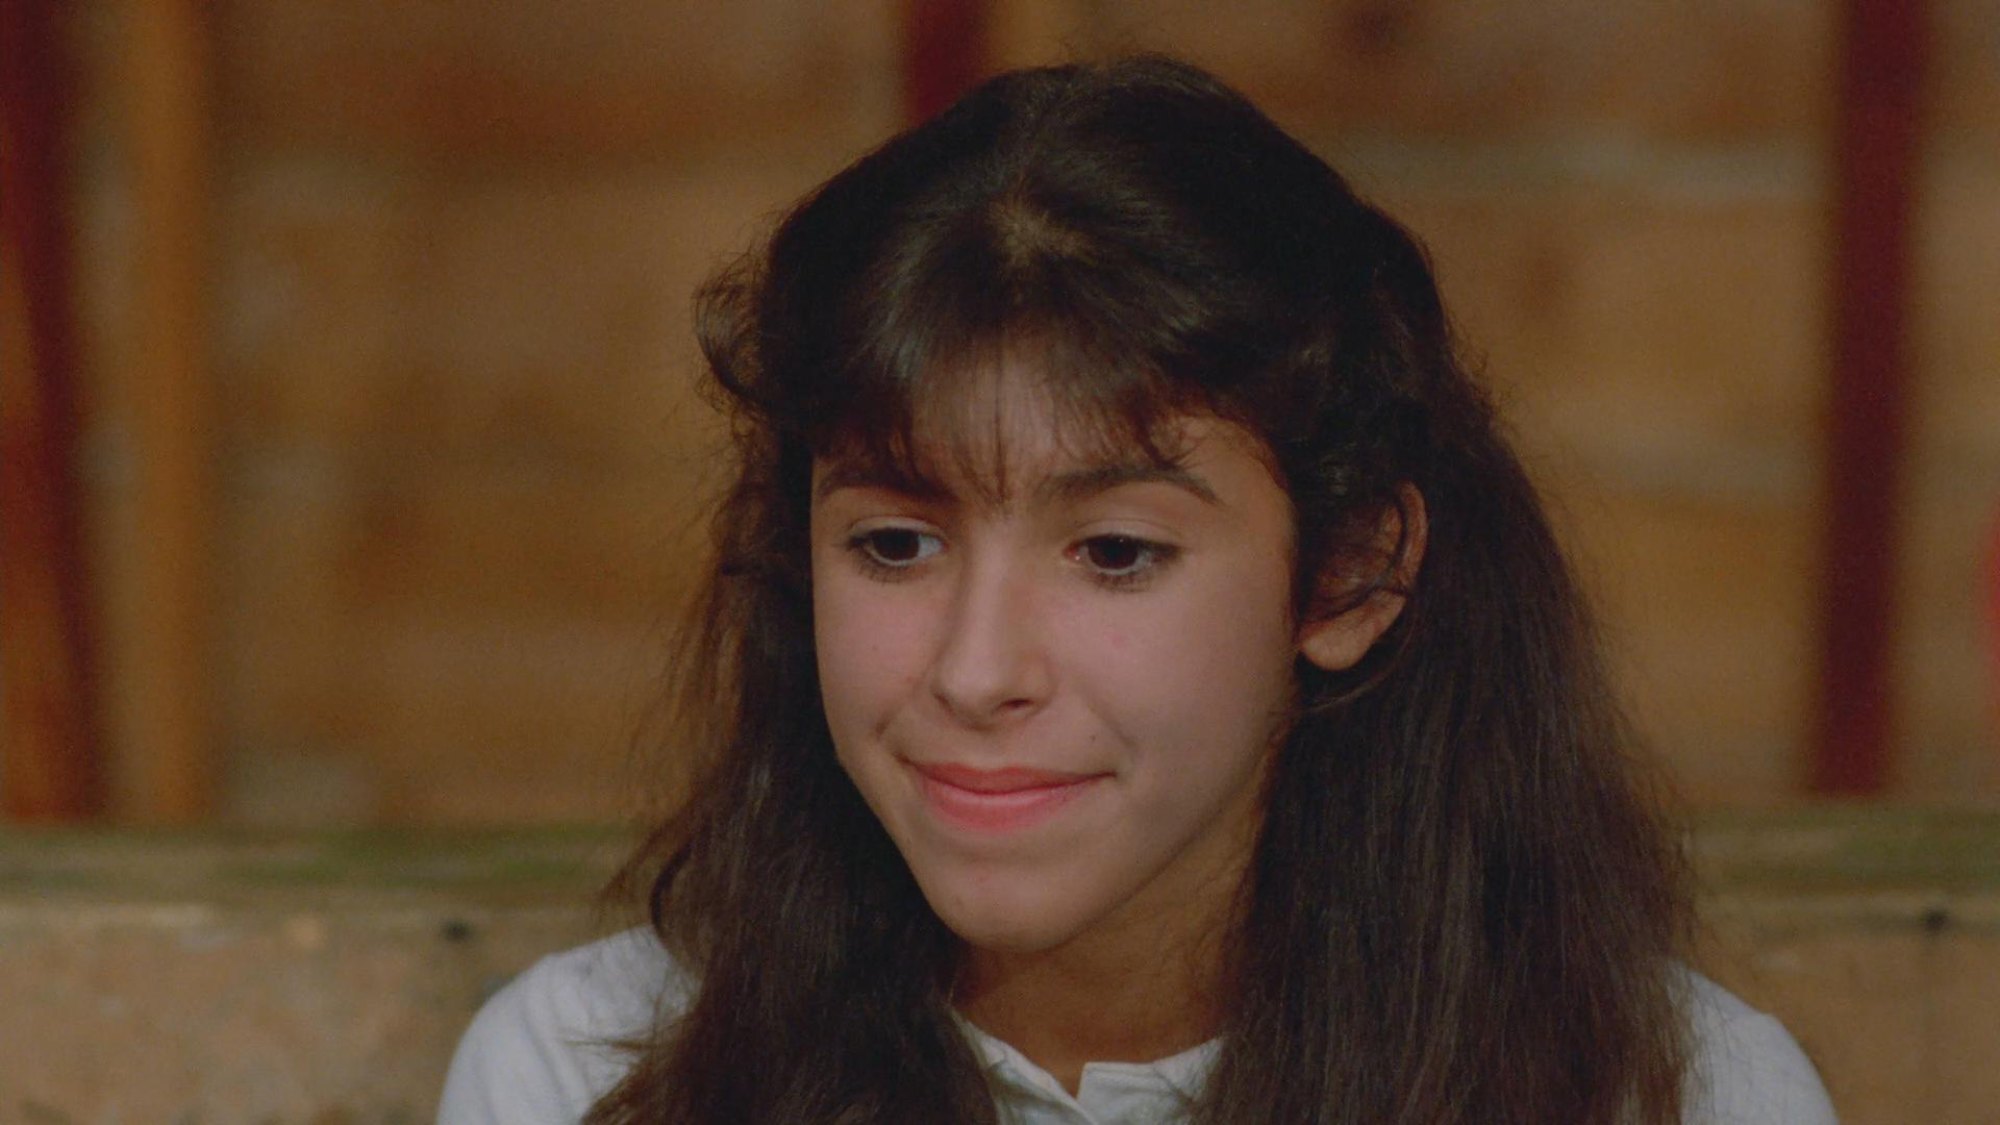 'Sleepaway Camp' Felissa Rose as Angela with a slight smile on her face, looking down.